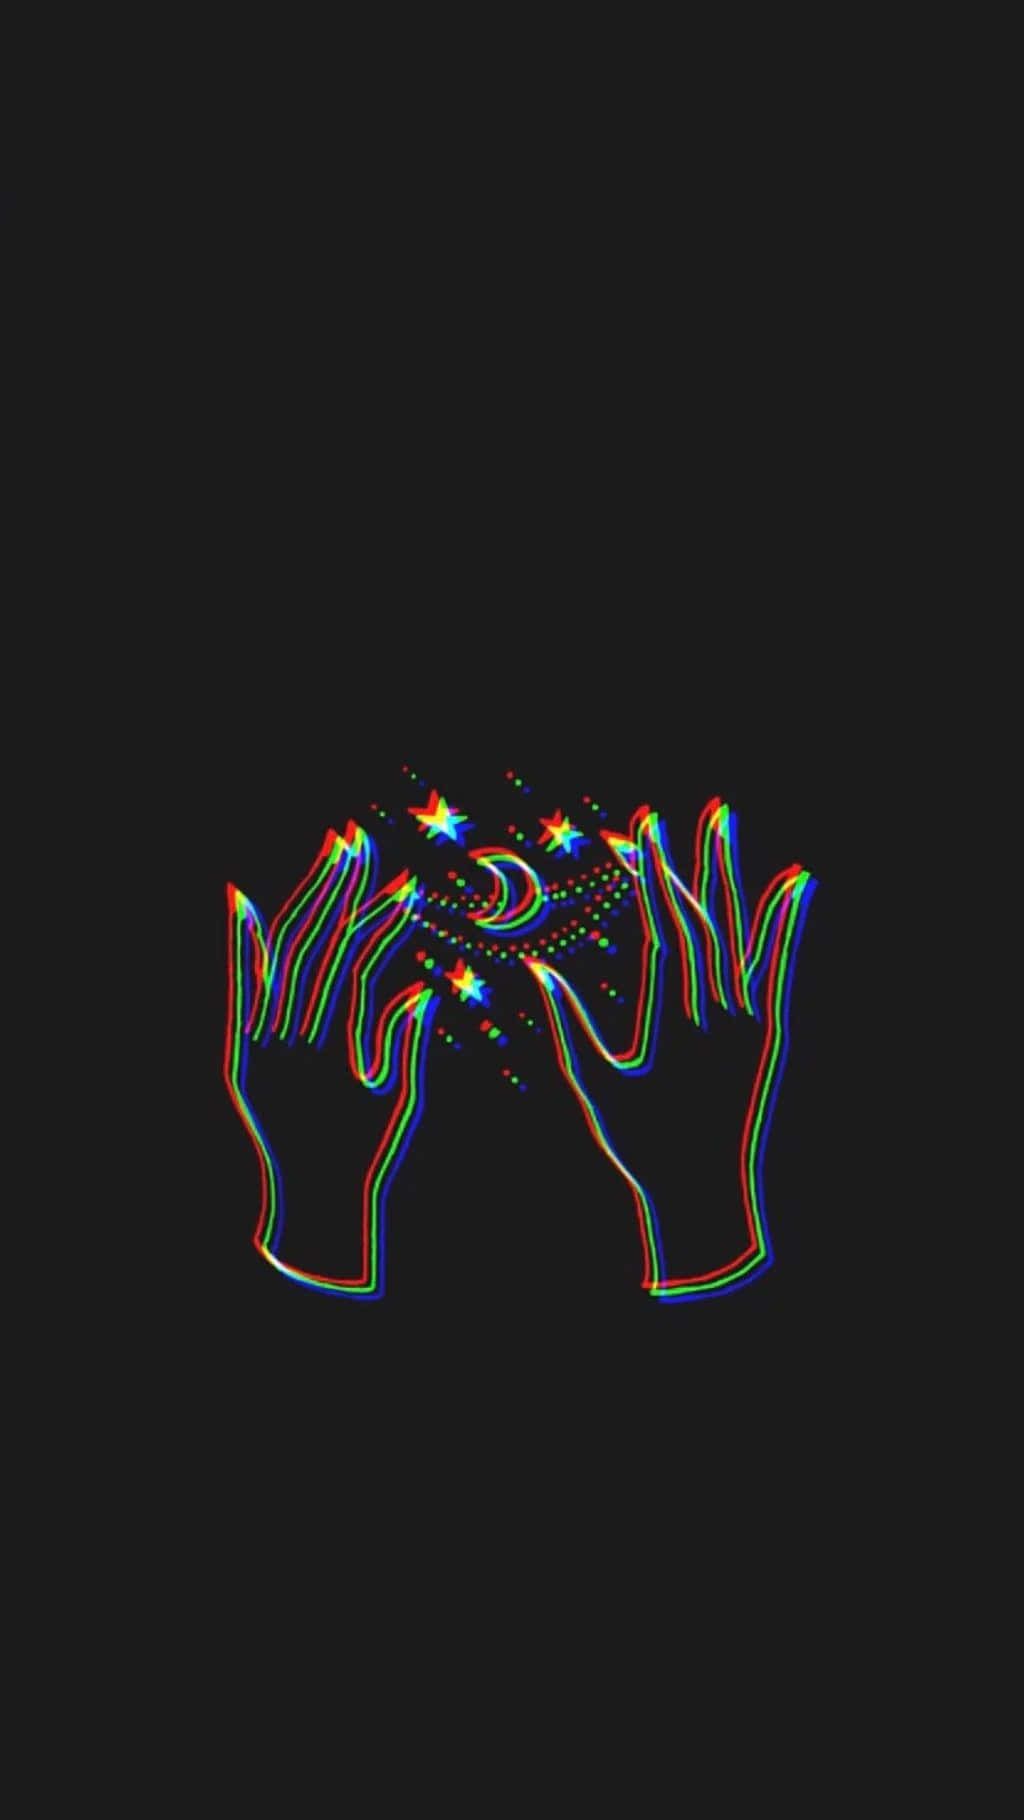 A black background with two hands holding each other - Capricorn